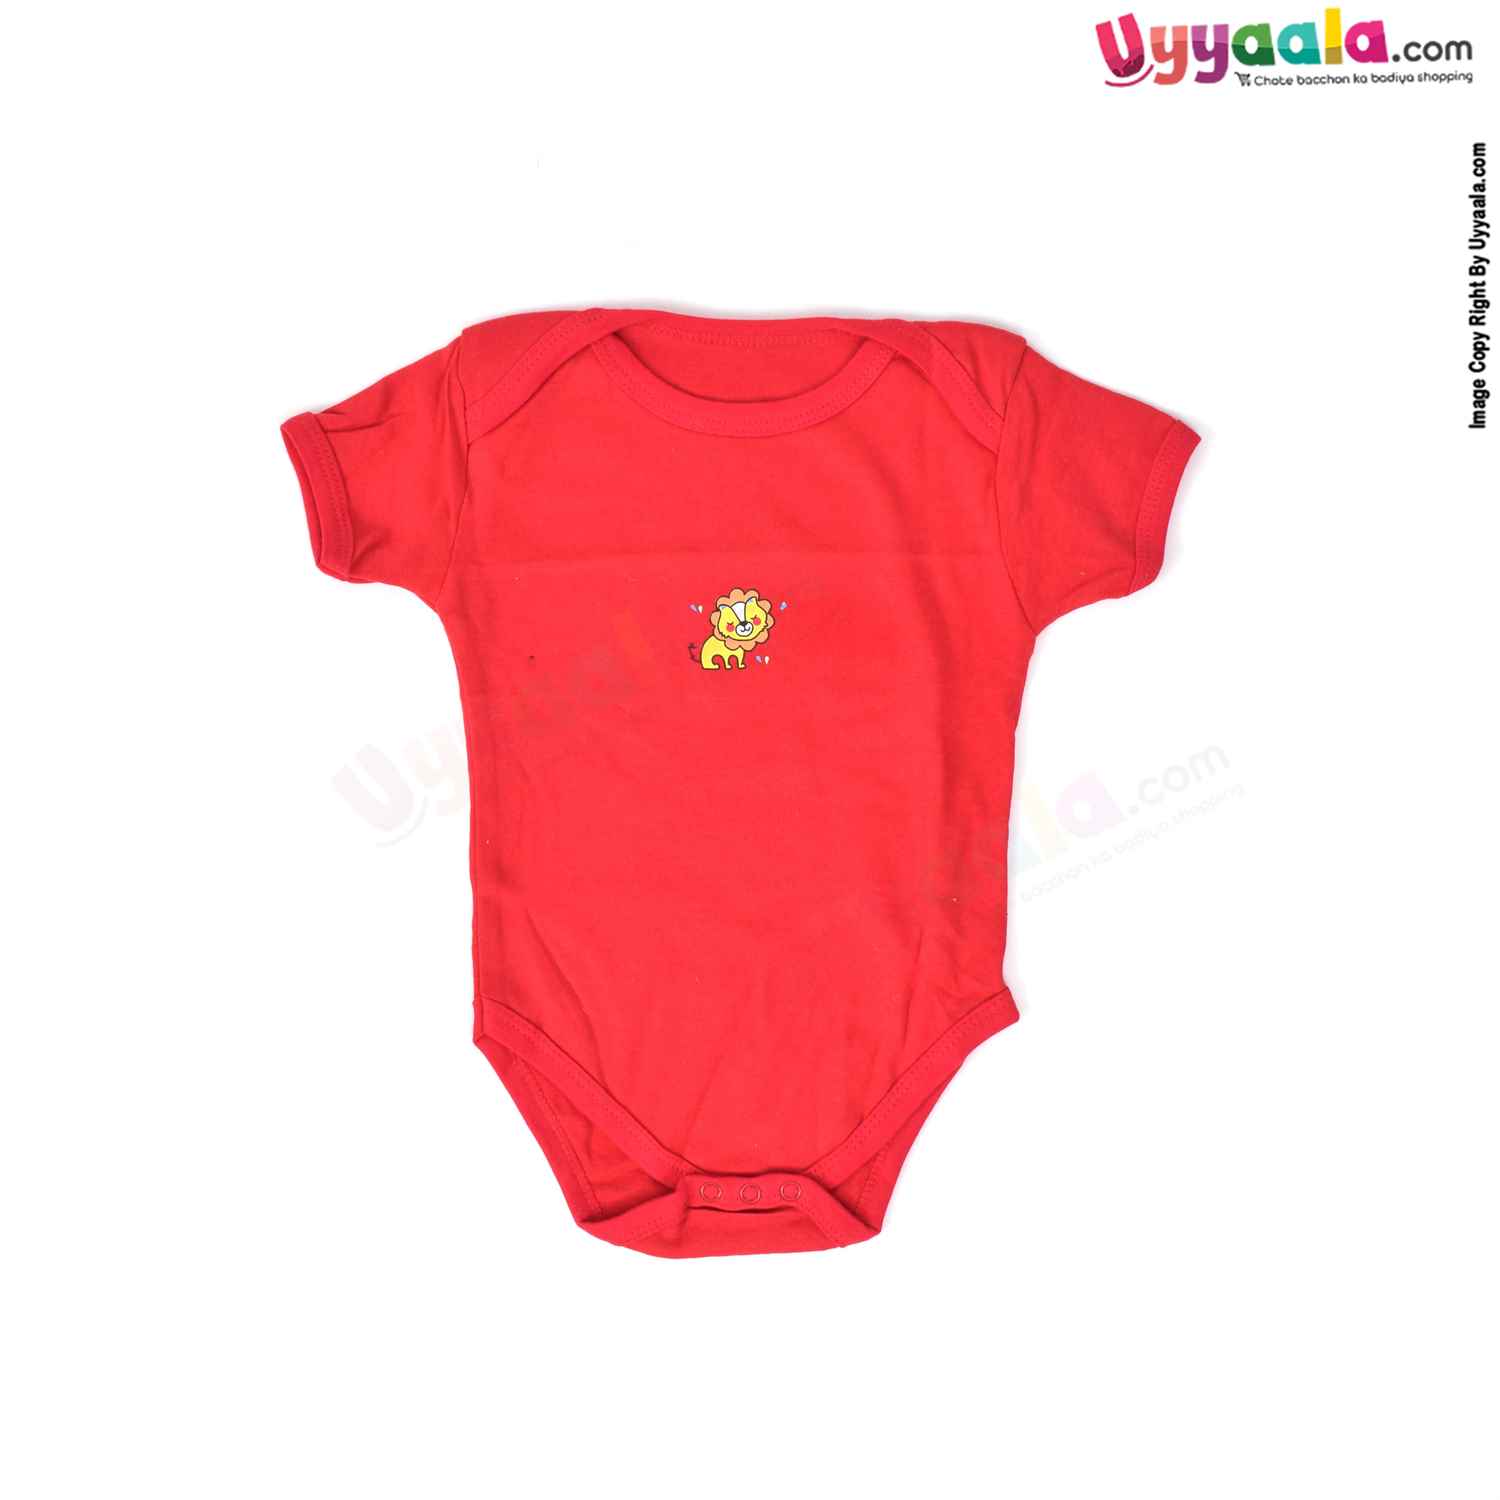 Precious One Short Sleeve Body Suit 100% Soft Hosiery Cotton - Red with Lion Print (9-12M)